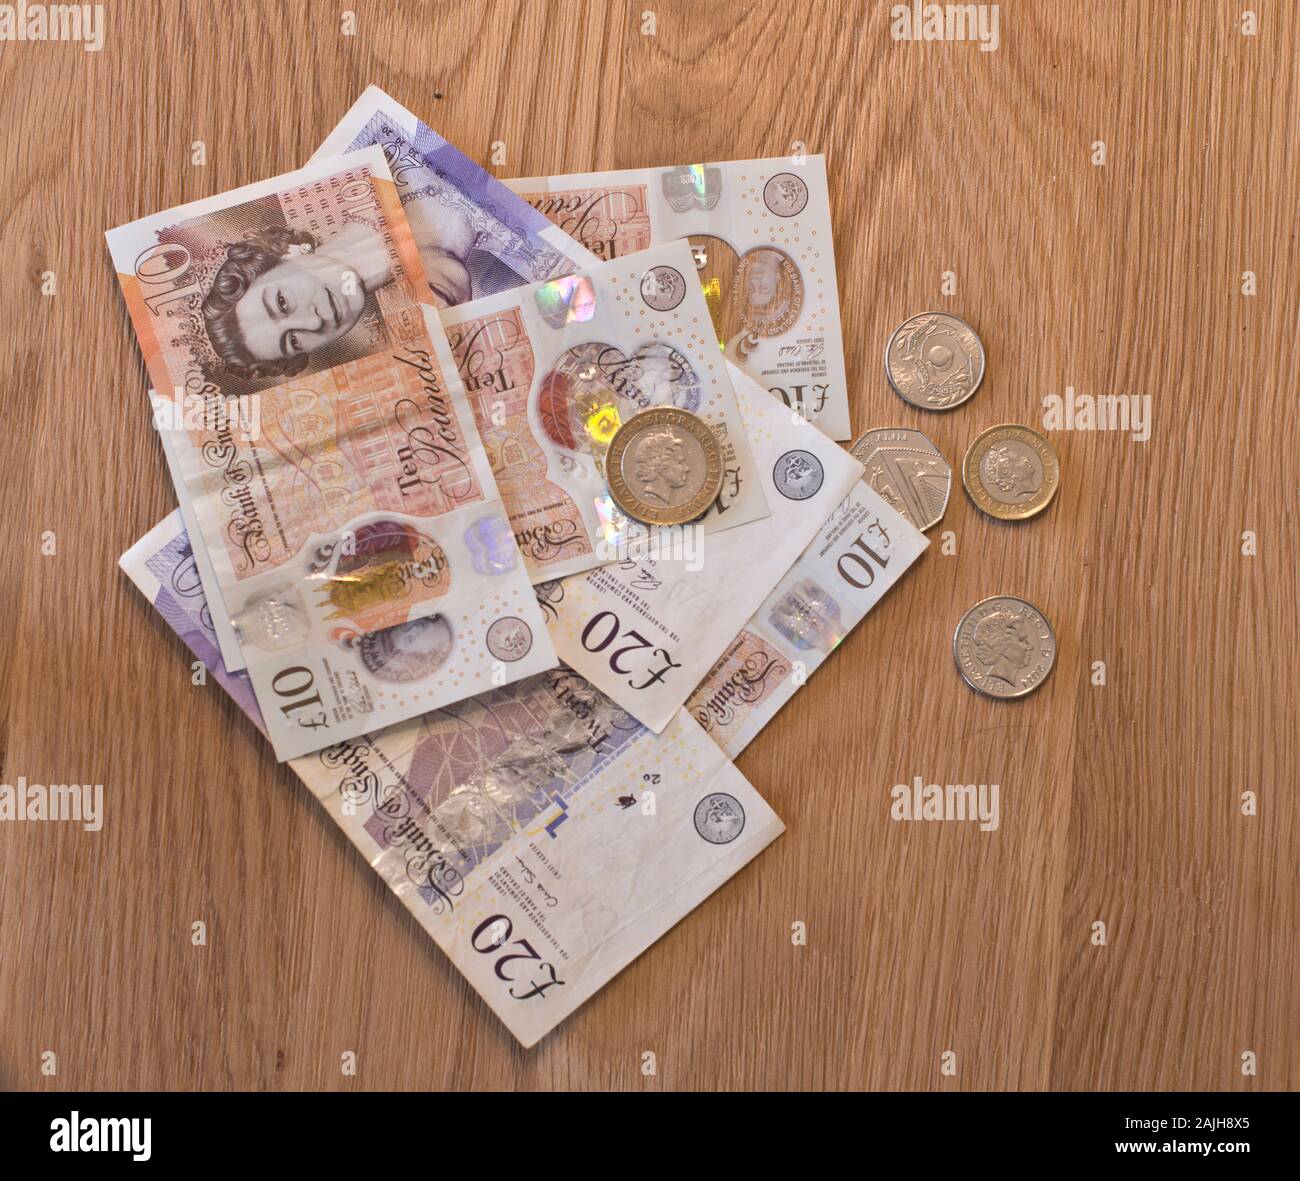 British currency notes and coins placed on a wooden background Stock Photo